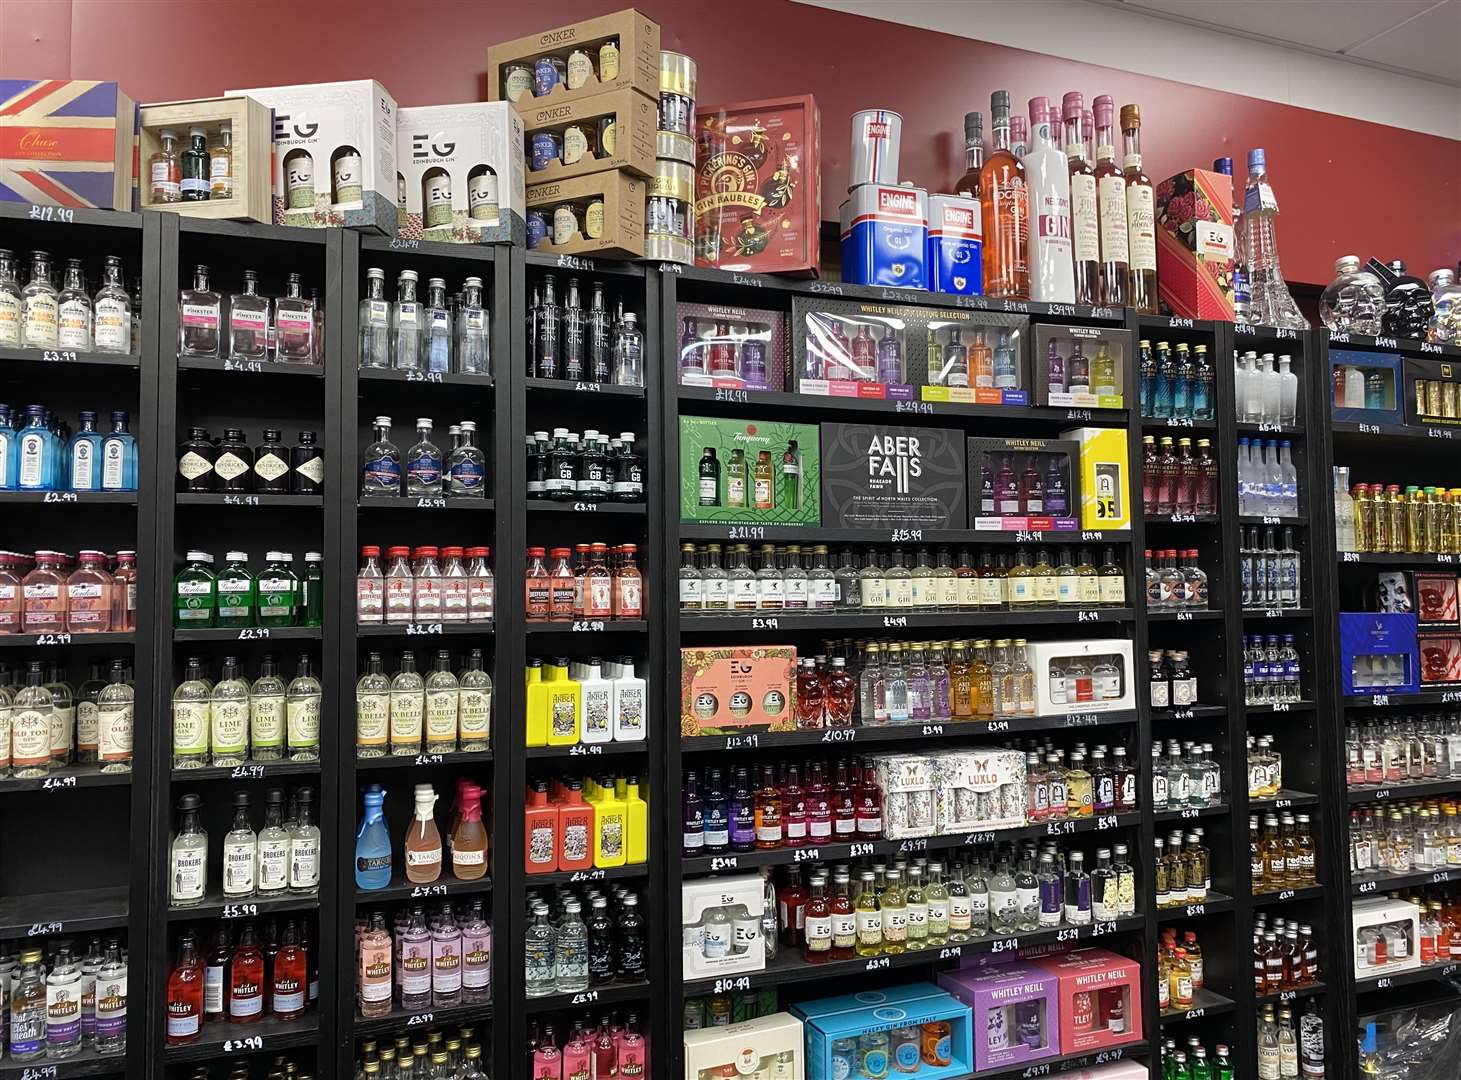 The store stocks just under 1,000 different brands of drinks